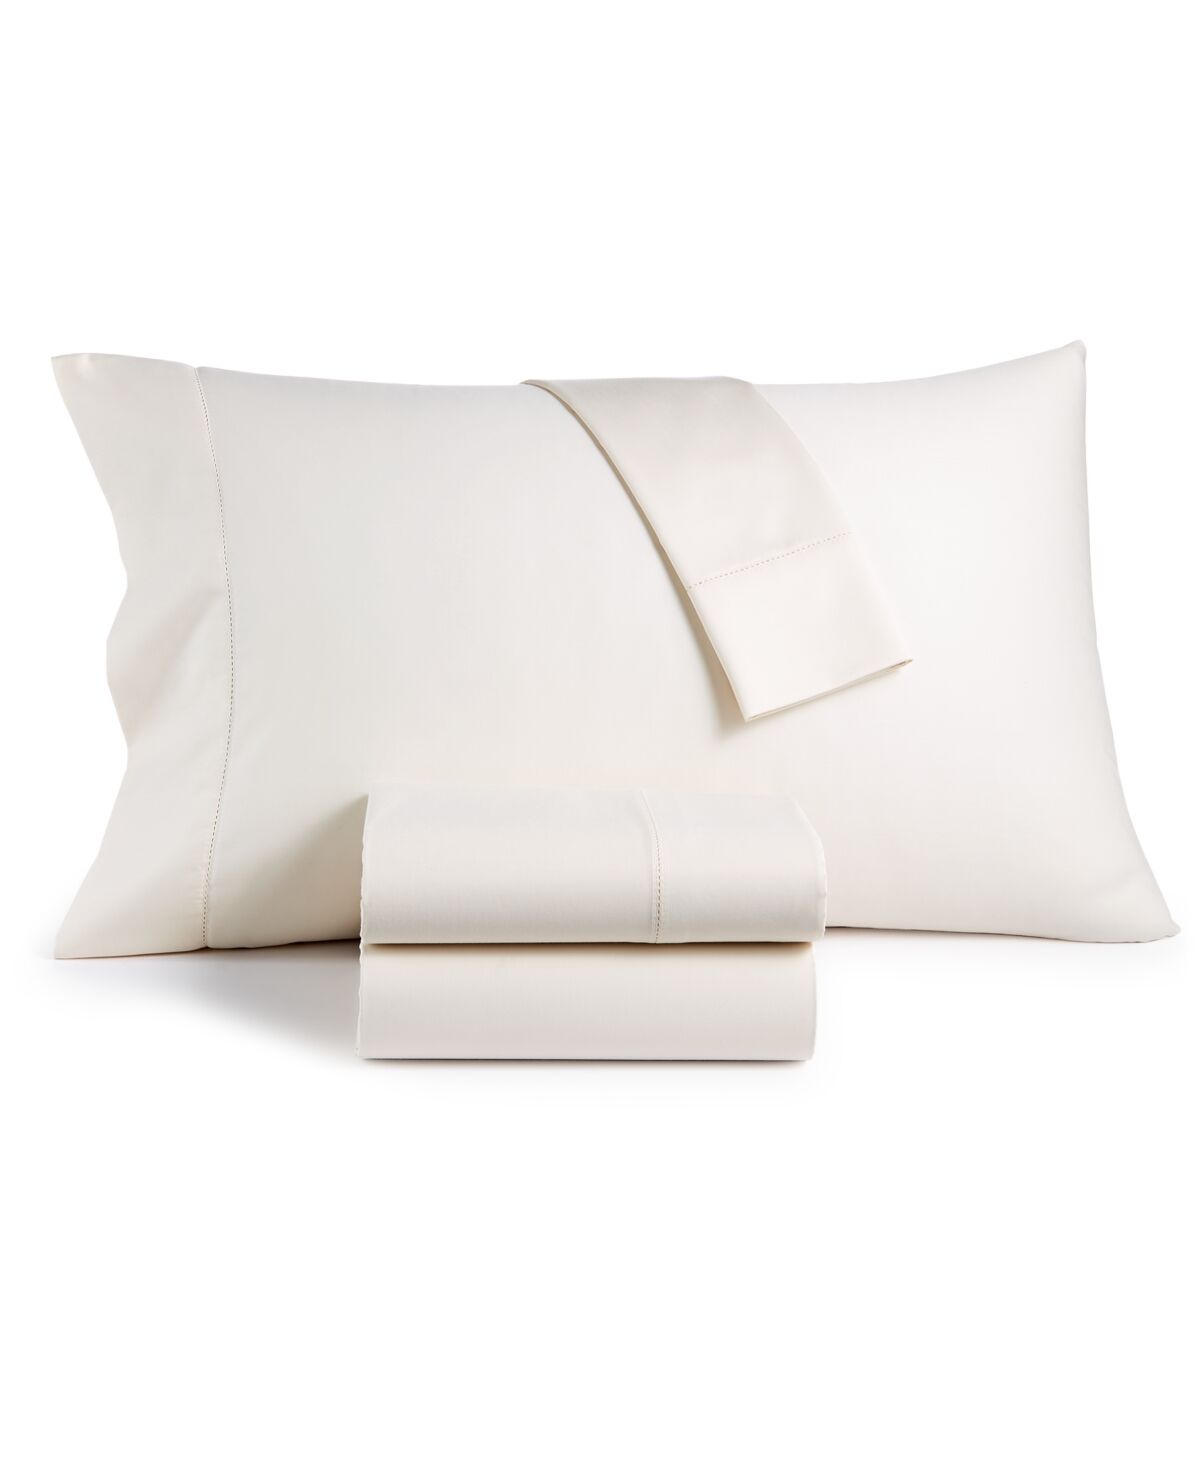 Hotel Collection 680 Thread Count 100% Supima Cotton Sheet Set, King, Created for Macy's - Ivory